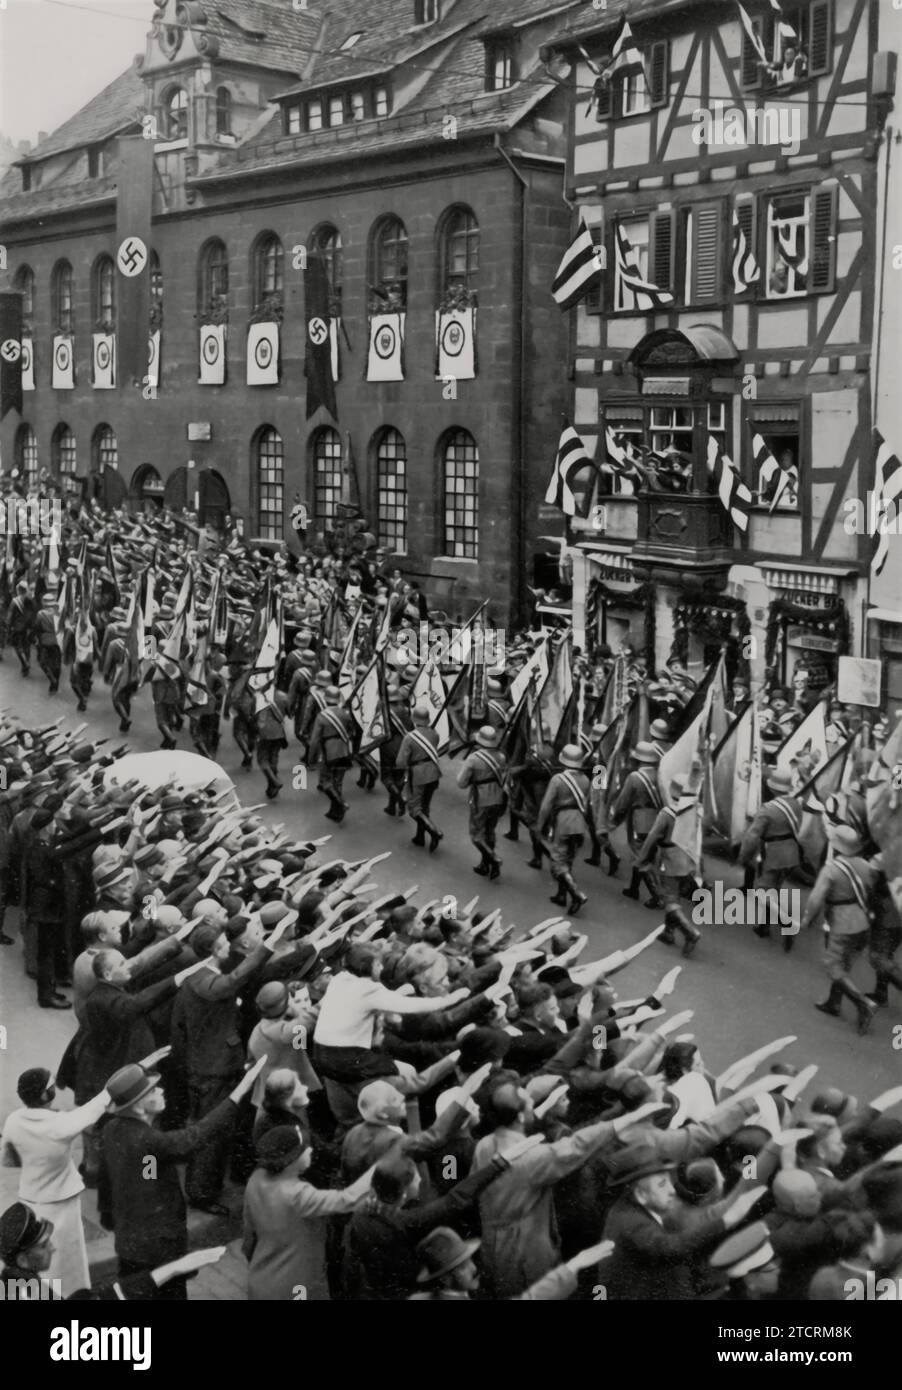 At the 1935 Nuremberg Rally, on the Day of the Armed Forces, soldiers march down the street, carrying the flags of Germany's historic army, as onlookers and supporters salute with their right arm. This powerful scene underscores the military heritage and tradition, showcasing the continuity and historical prestige of the German Army, while also reflecting the widespread public support and participation in Nazi propaganda. Stock Photo